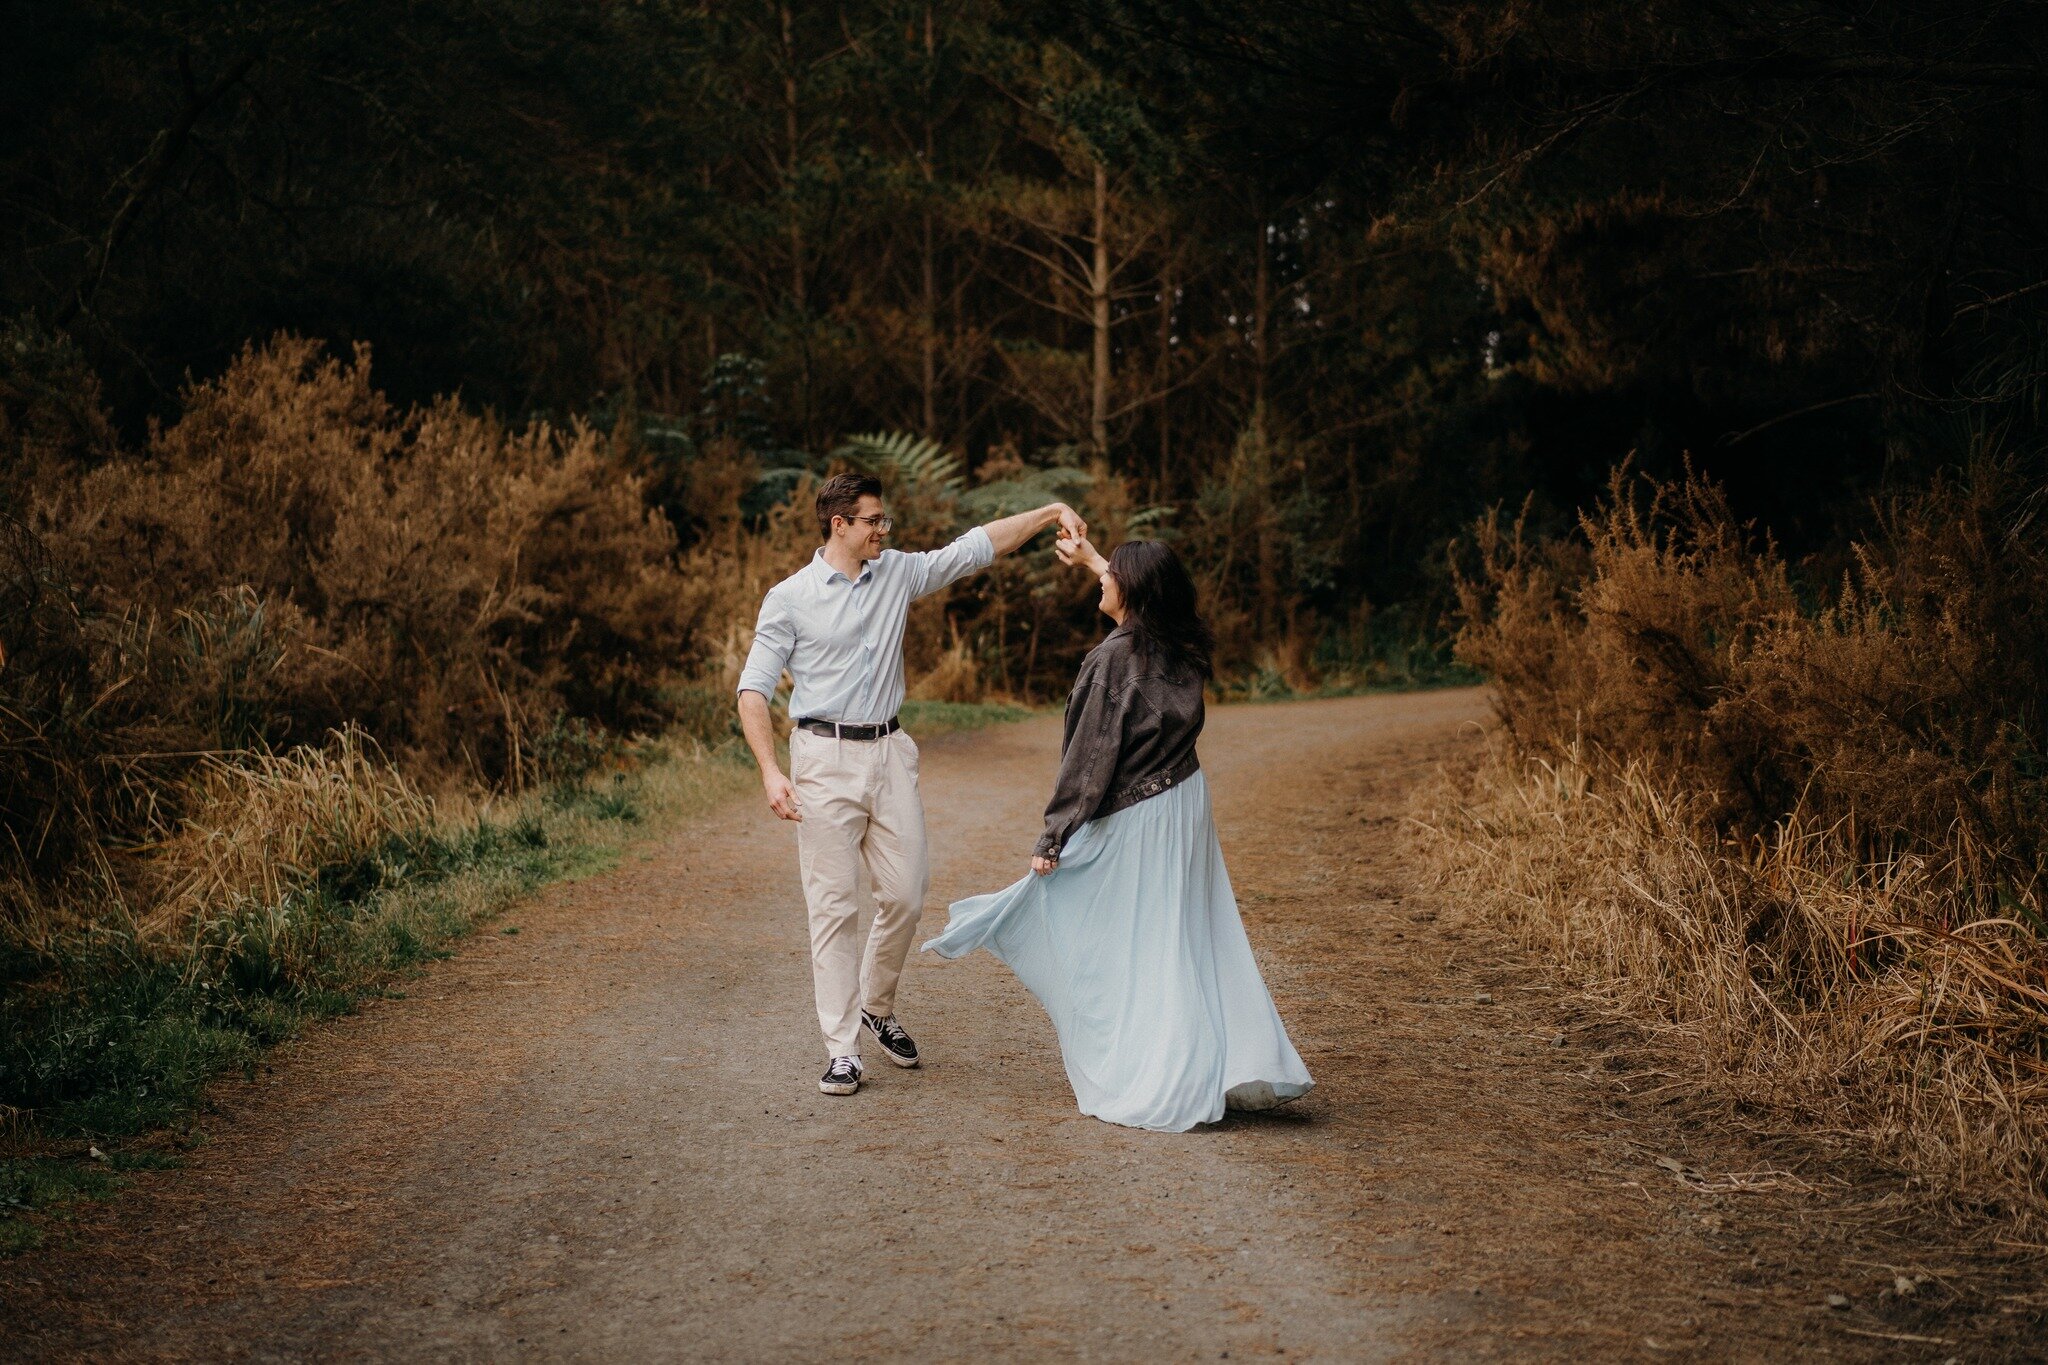 Vianne &amp; Cameron 

You dance love, and you dance joy, and you dance dreams. 
- Gene Kelly 

#engagementphotographer #engagementsession #engagementphotos #weddingphotographyweddingphotogr #aucklandweddingphotographer #aucklandphotographer #tashina